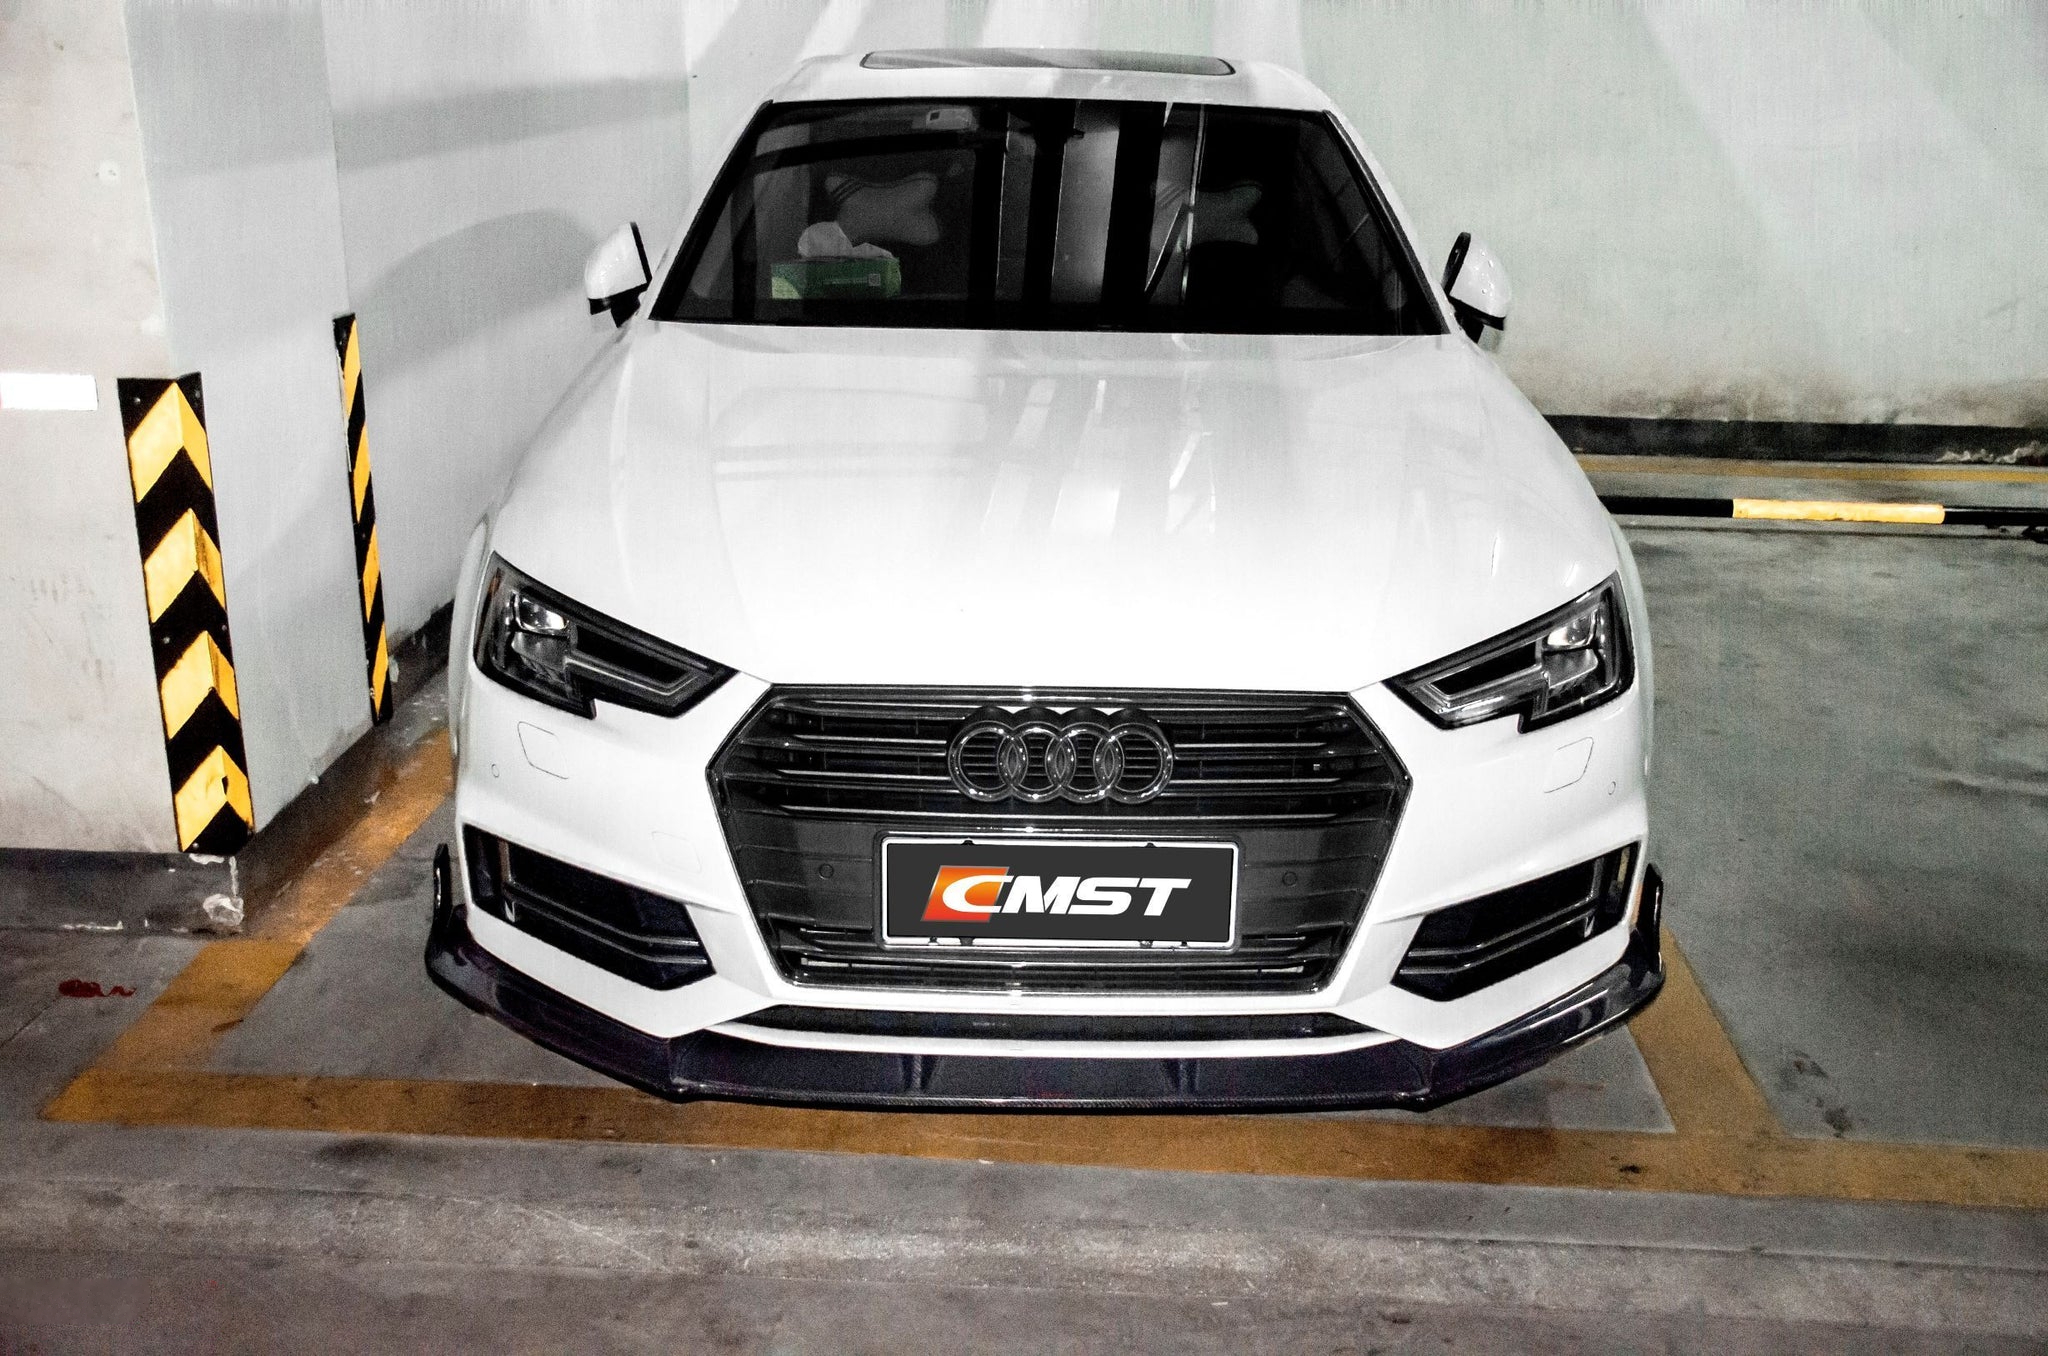 Check our price and buy CMST Carbon Fiber Body Kit set for Audi A4 S-Line / S4 B9!